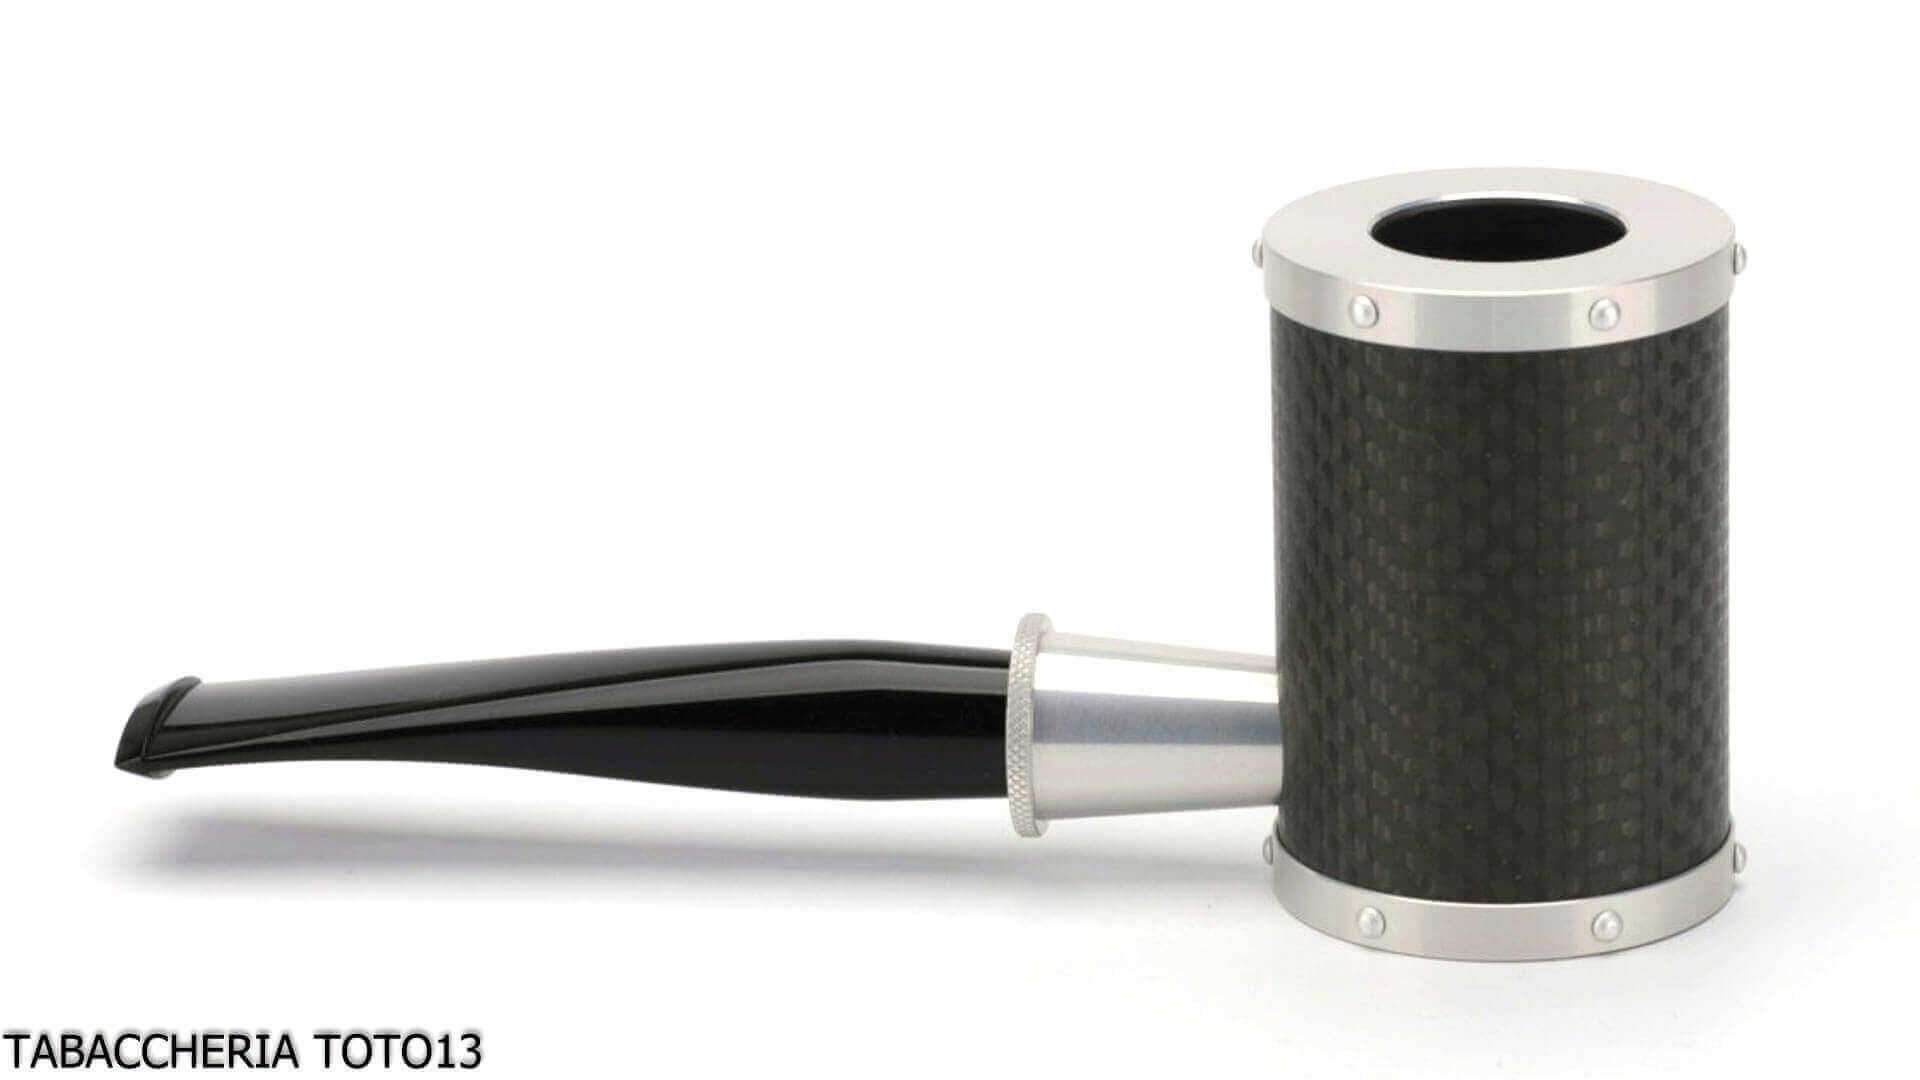 New TSUGE Metal Pipe G9 YOROI Gold 135mm Smoking Pipe 9mm Filter available 